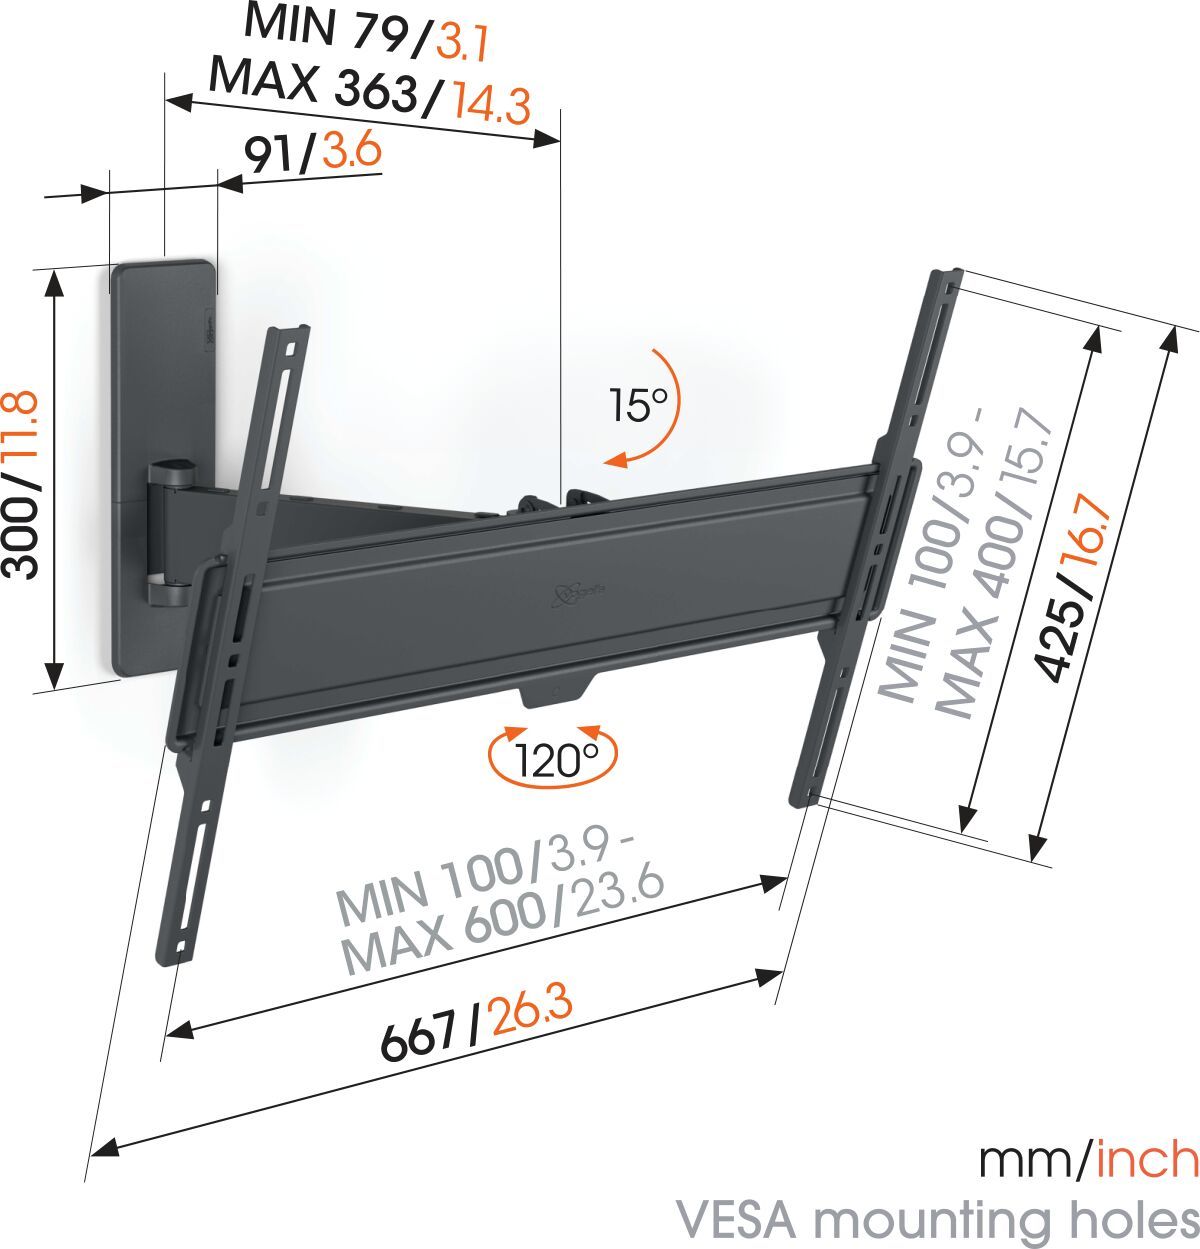 Vogel's TVM 1625 Full-Motion TV Wall Mount - Suitable for 40 up to 77 inch TVs - Motion (up to 120°) swivel - Tilt up to 15° - Dimensions